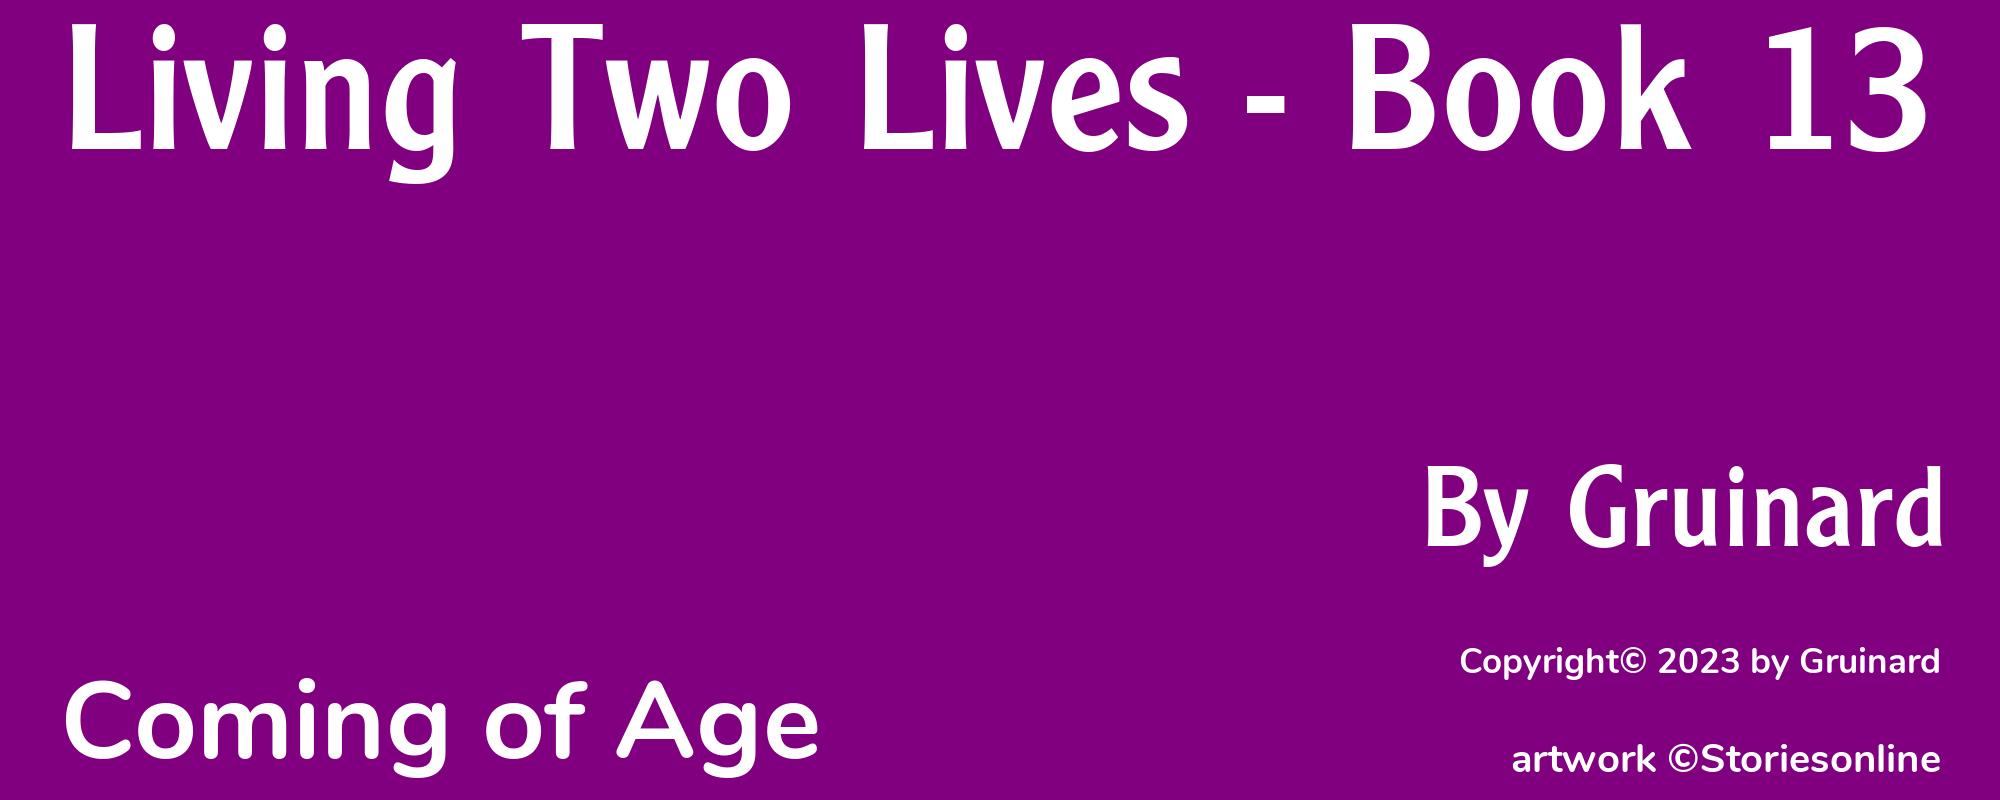 Living Two Lives - Book 13 - Cover